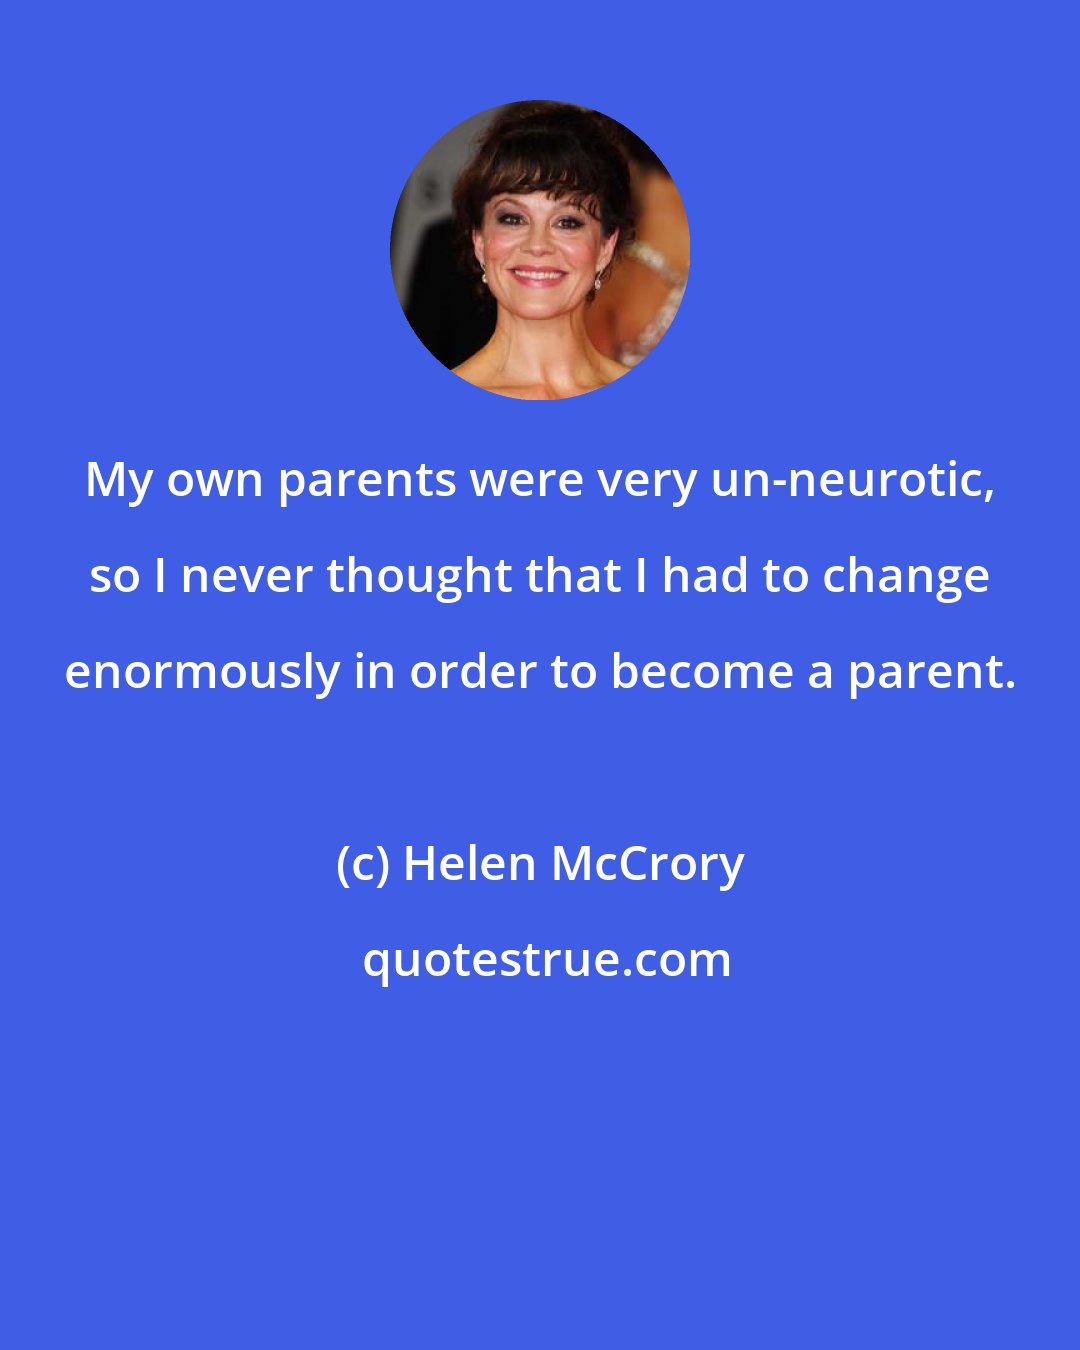 Helen McCrory: My own parents were very un-neurotic, so I never thought that I had to change enormously in order to become a parent.